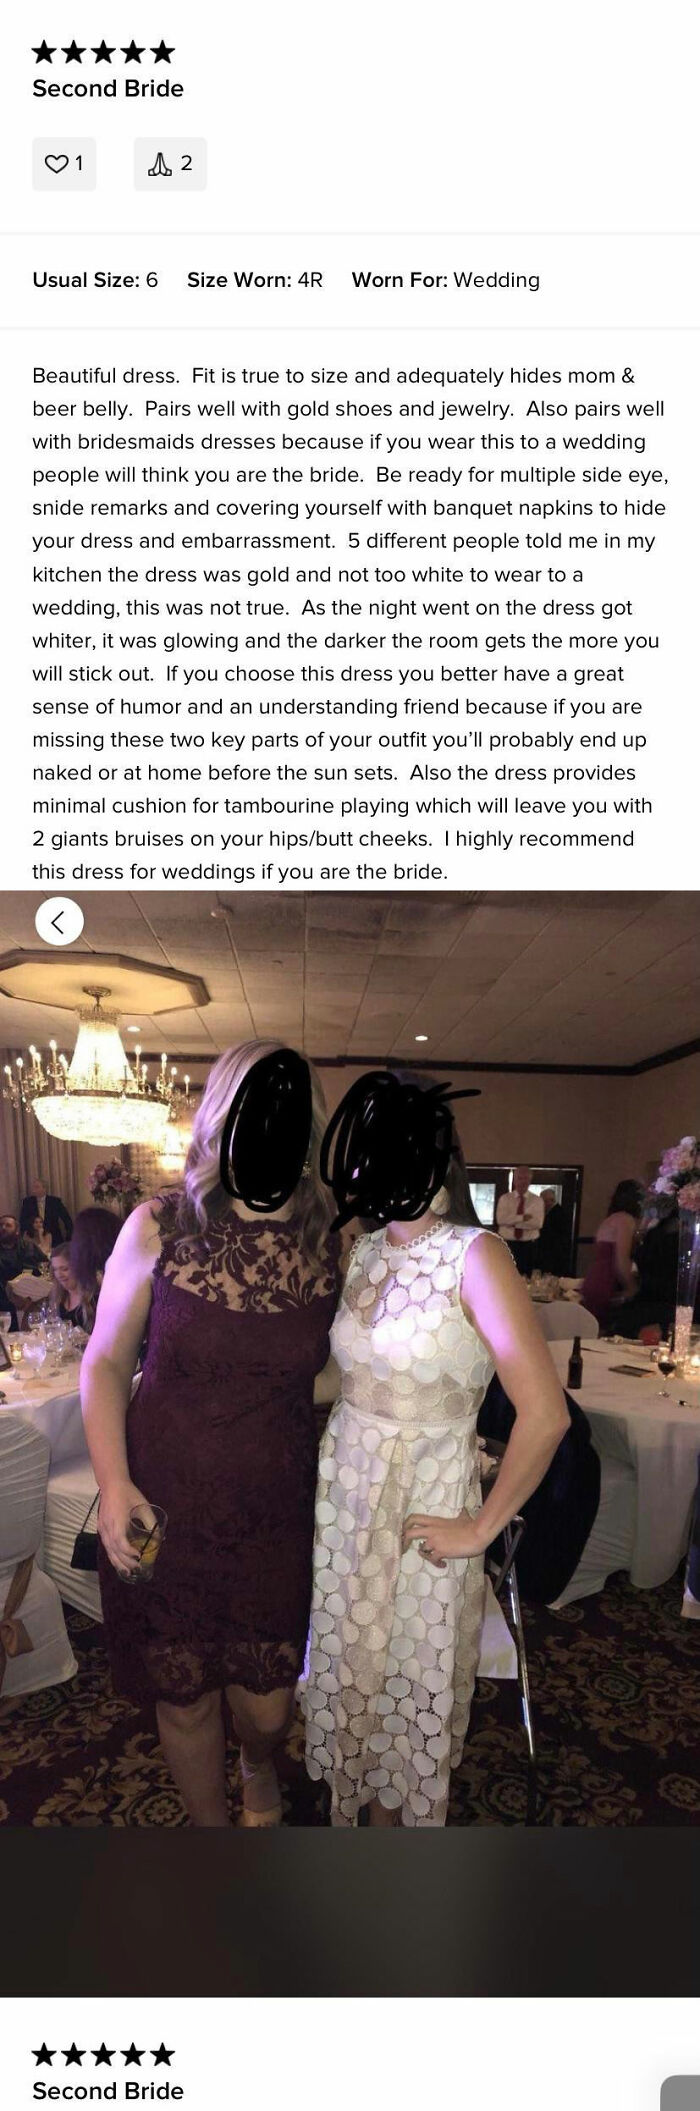 “Second Bride” Came Across This Browsing A Dress Rental Site